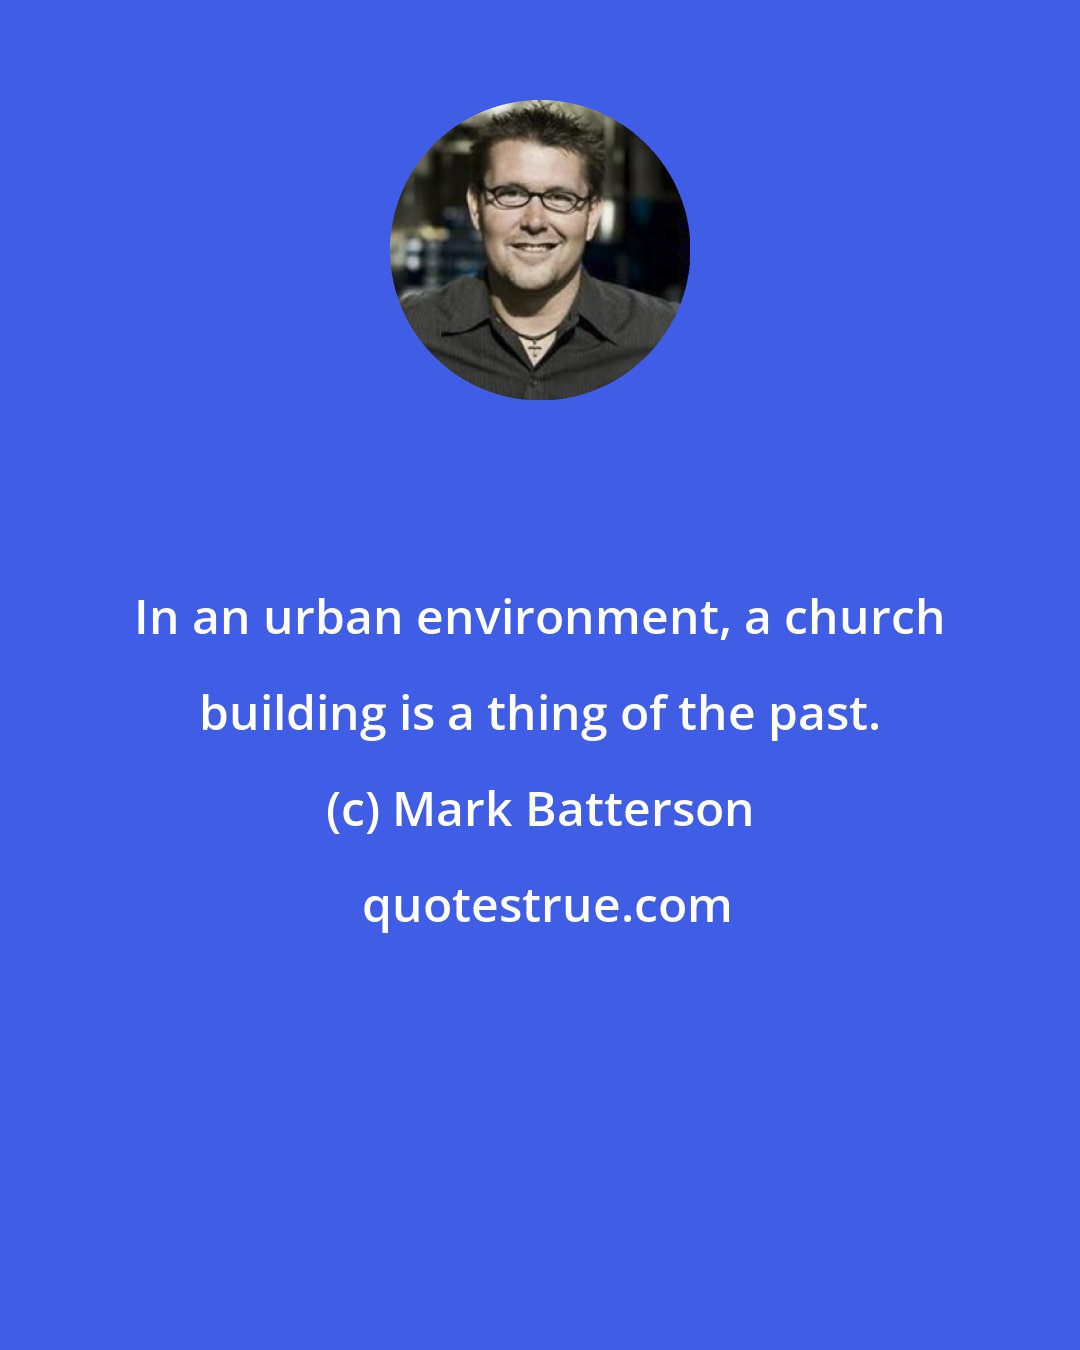 Mark Batterson: In an urban environment, a church building is a thing of the past.